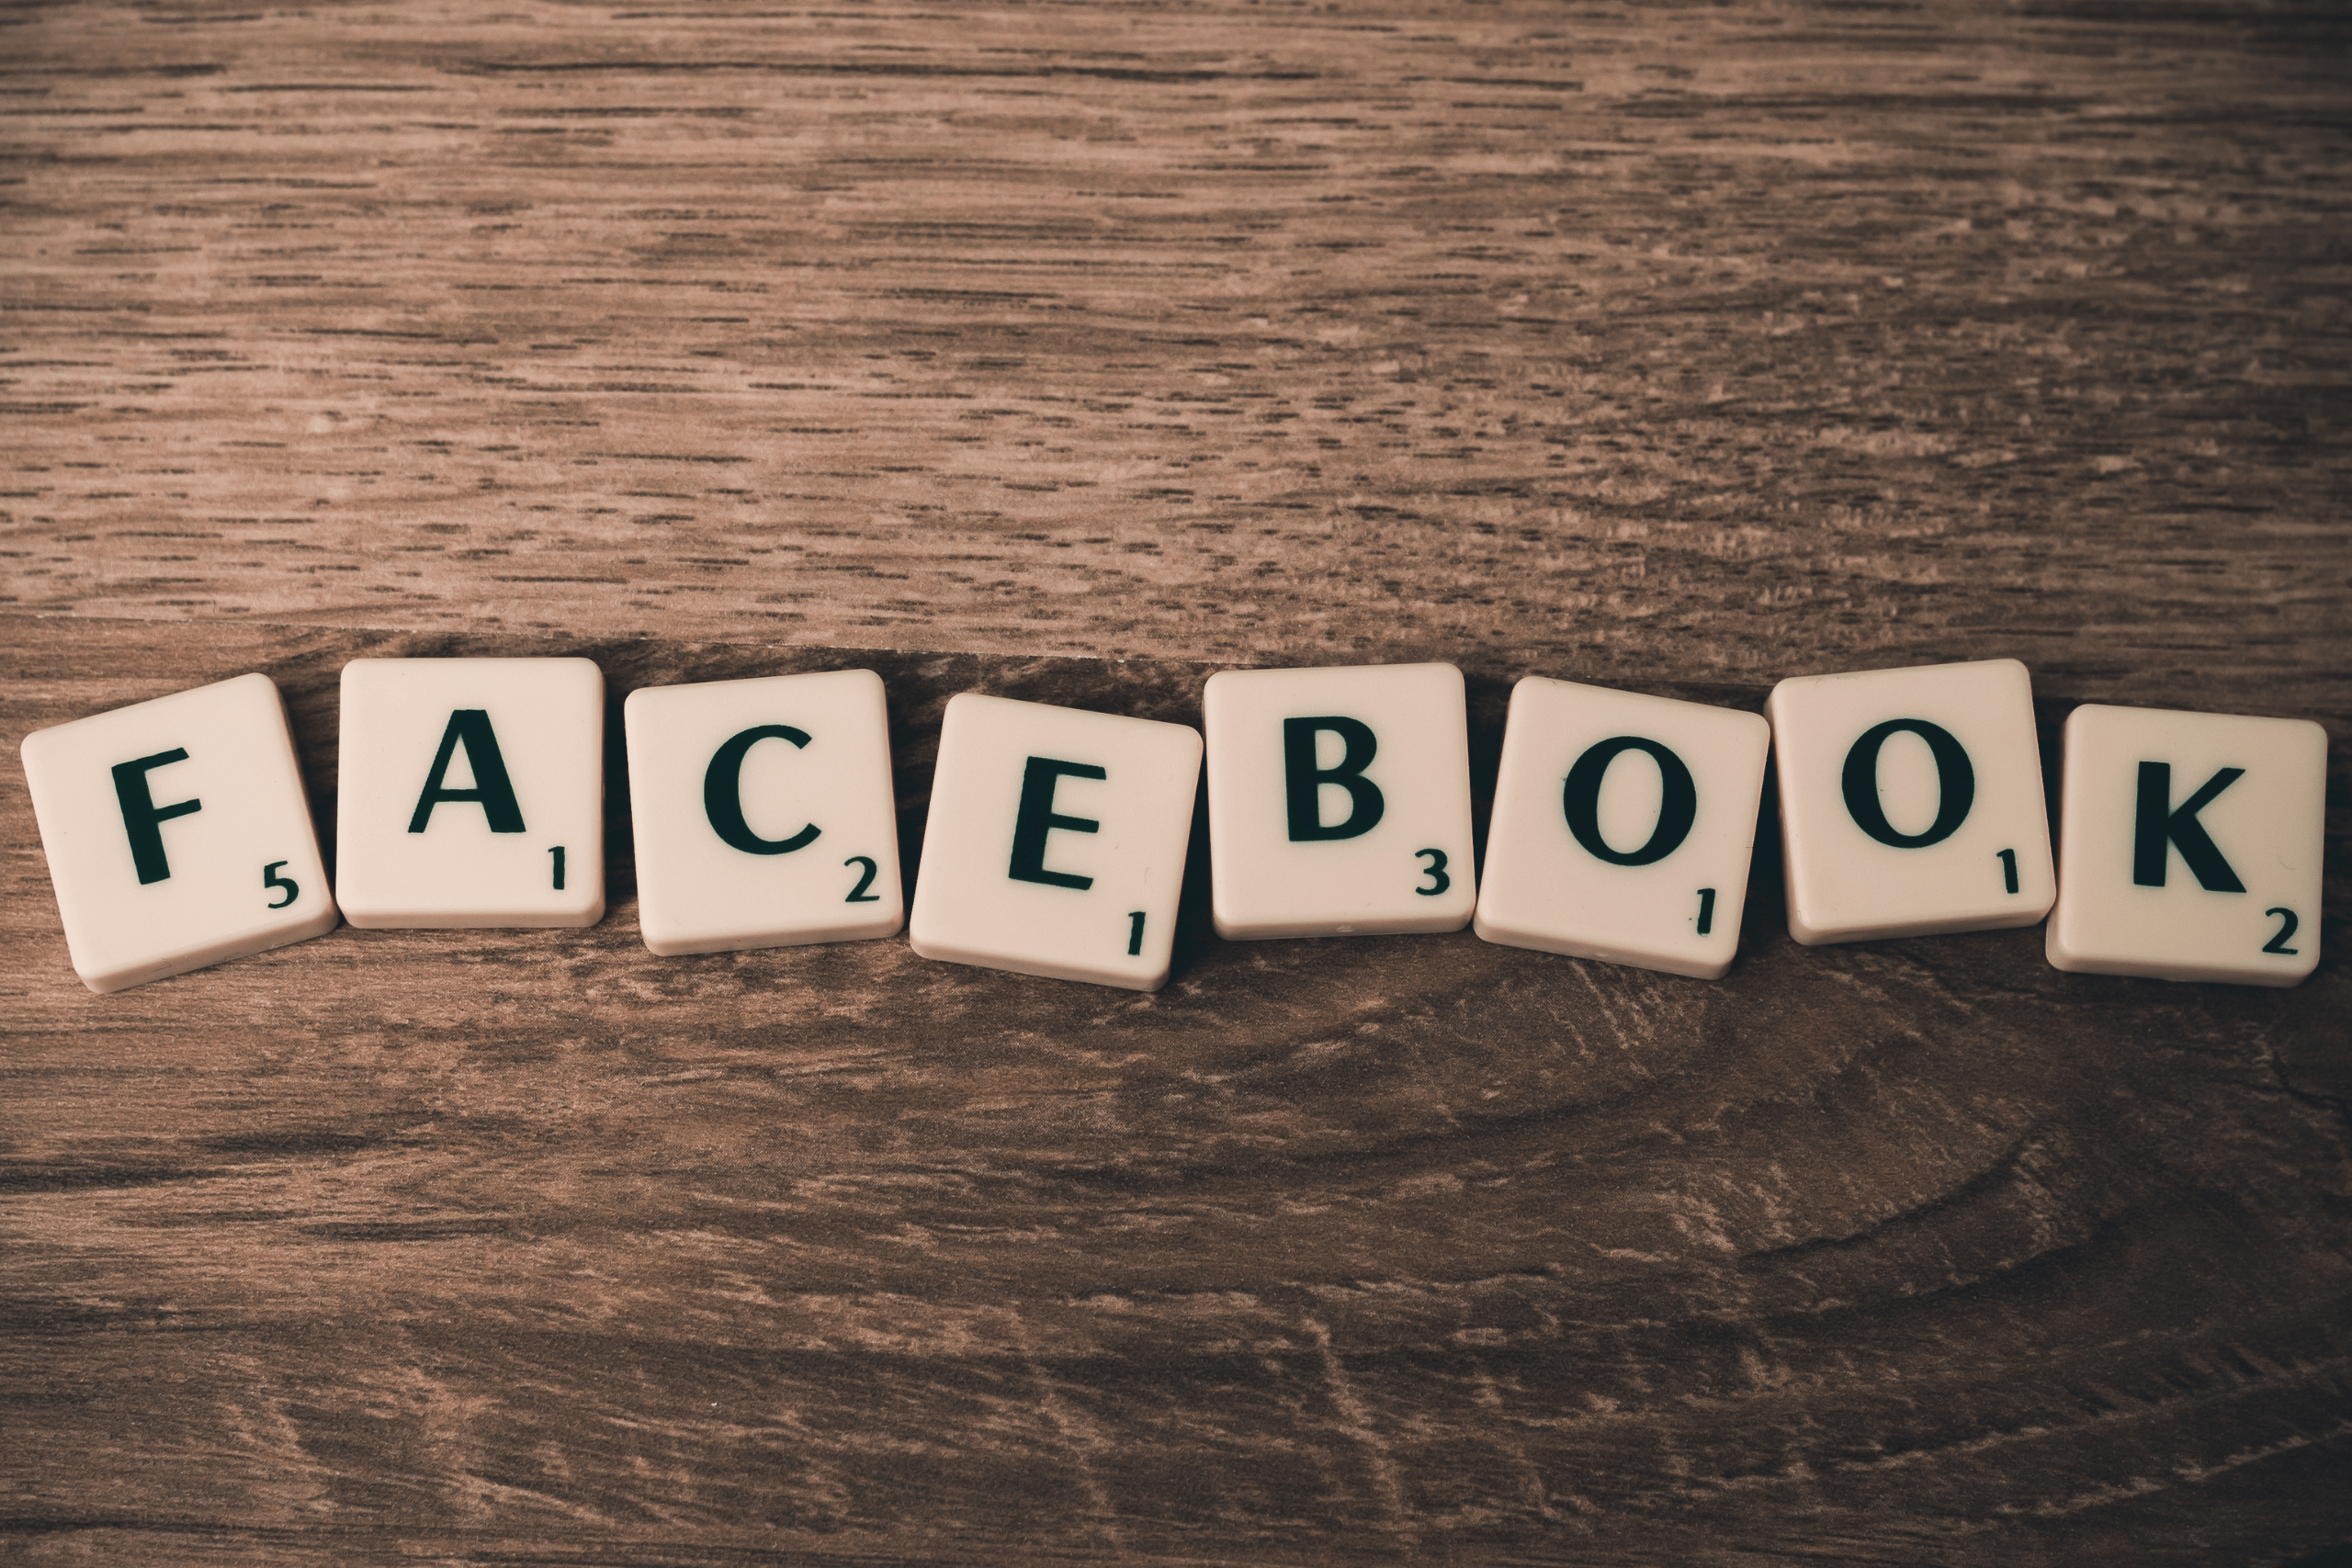 Facebook spelt in Scrabble pieces to introduce our blog titled 'Marketing On Facebook'